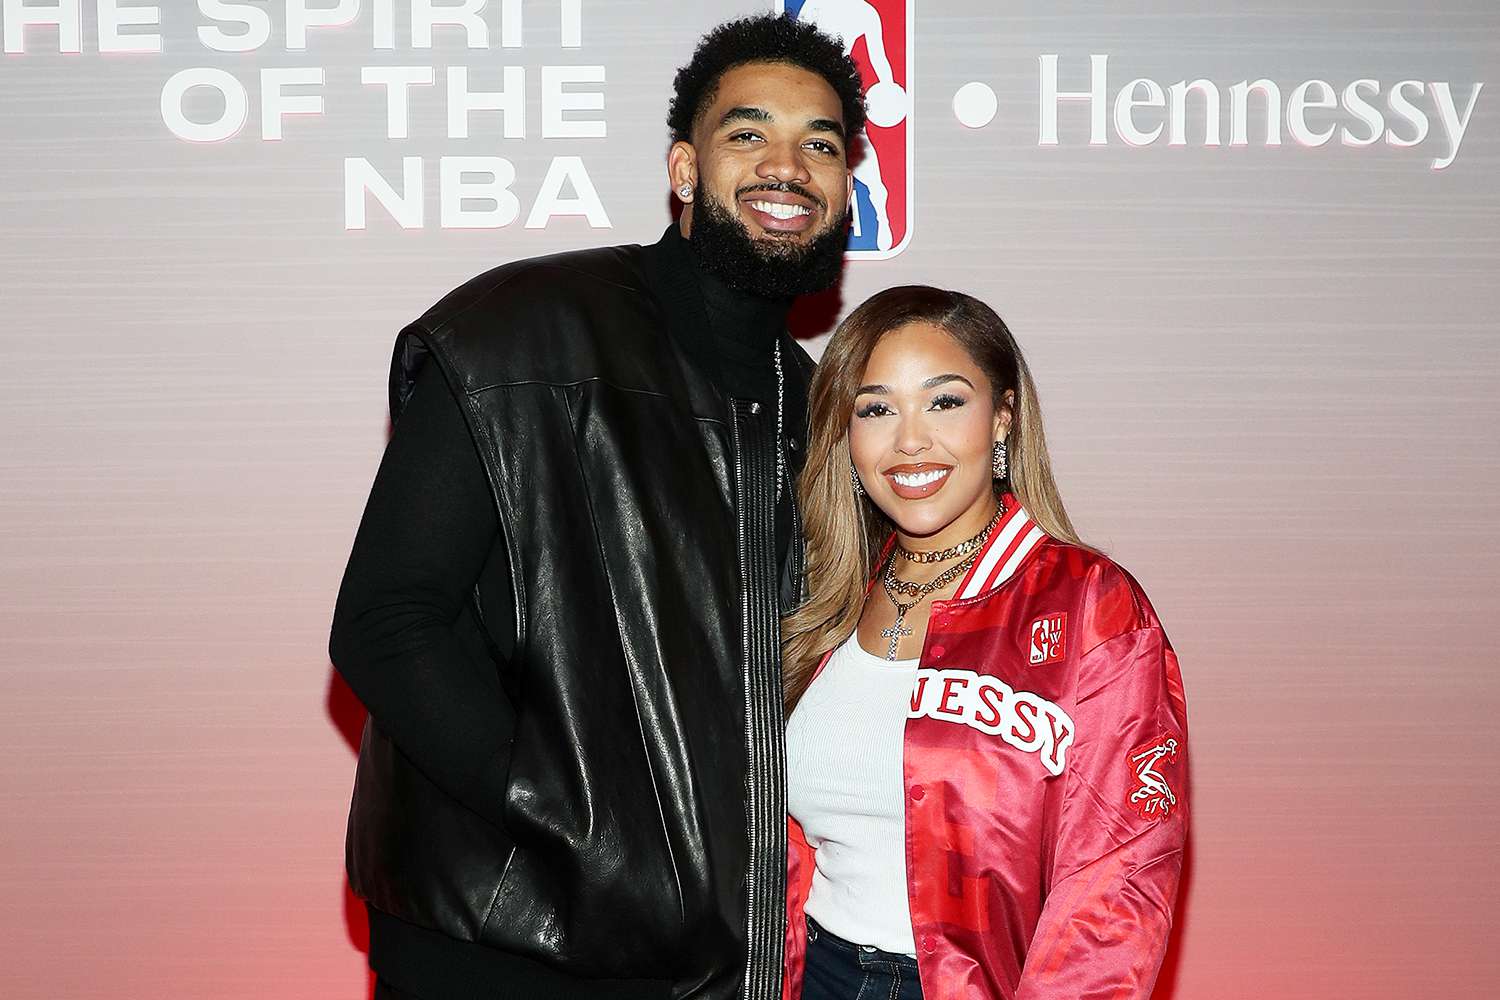 Jordyn Woods Shares Snippet of Song She Wrote for Boyfriend Karl-Anthony Towns: '4 Years with My Bestfriend'